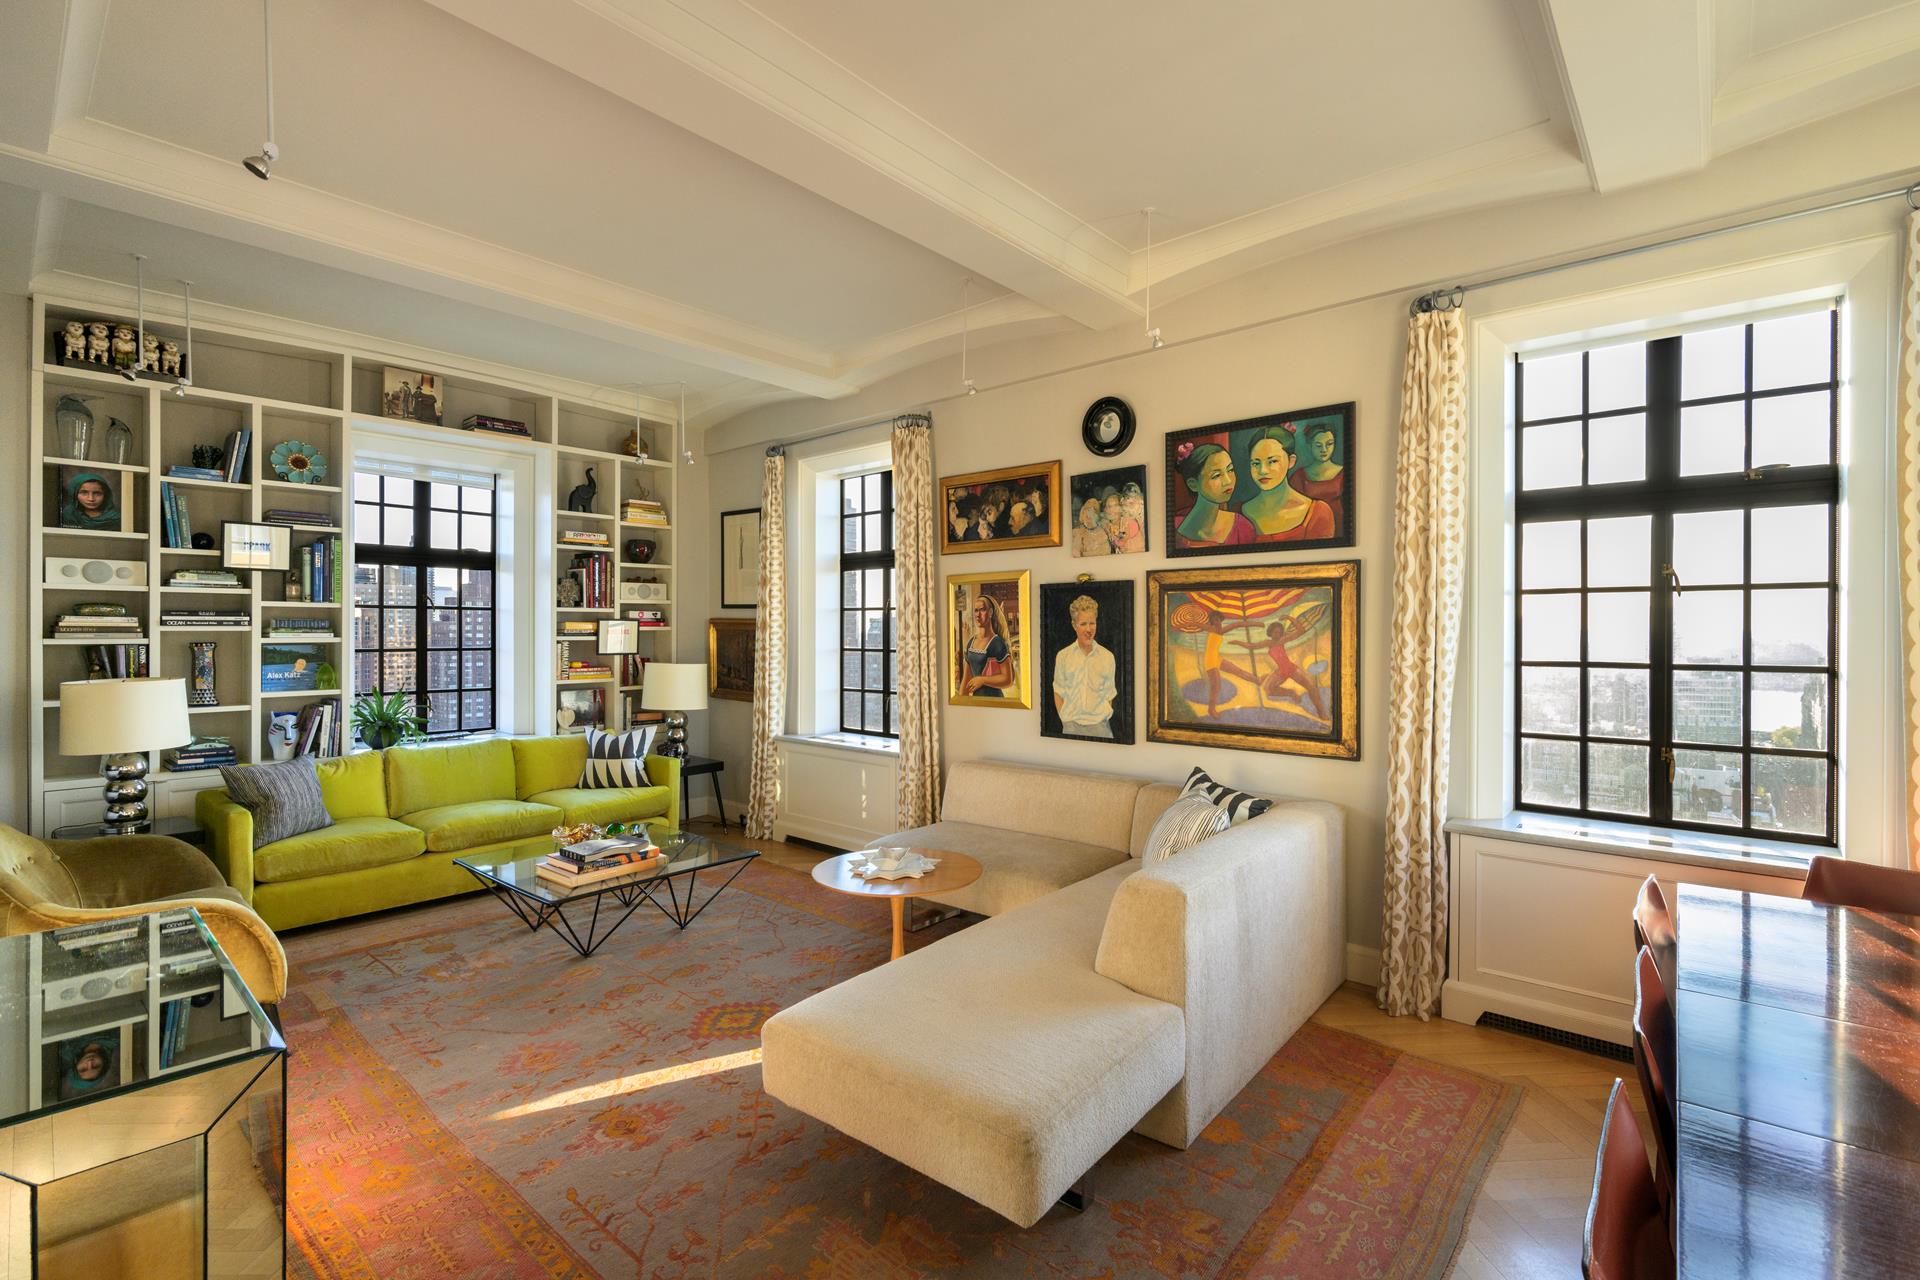 12 West 72nd Street Pha, Lincoln Sq, Upper West Side, NYC - 3 Bedrooms  
2.5 Bathrooms  
6 Rooms - 